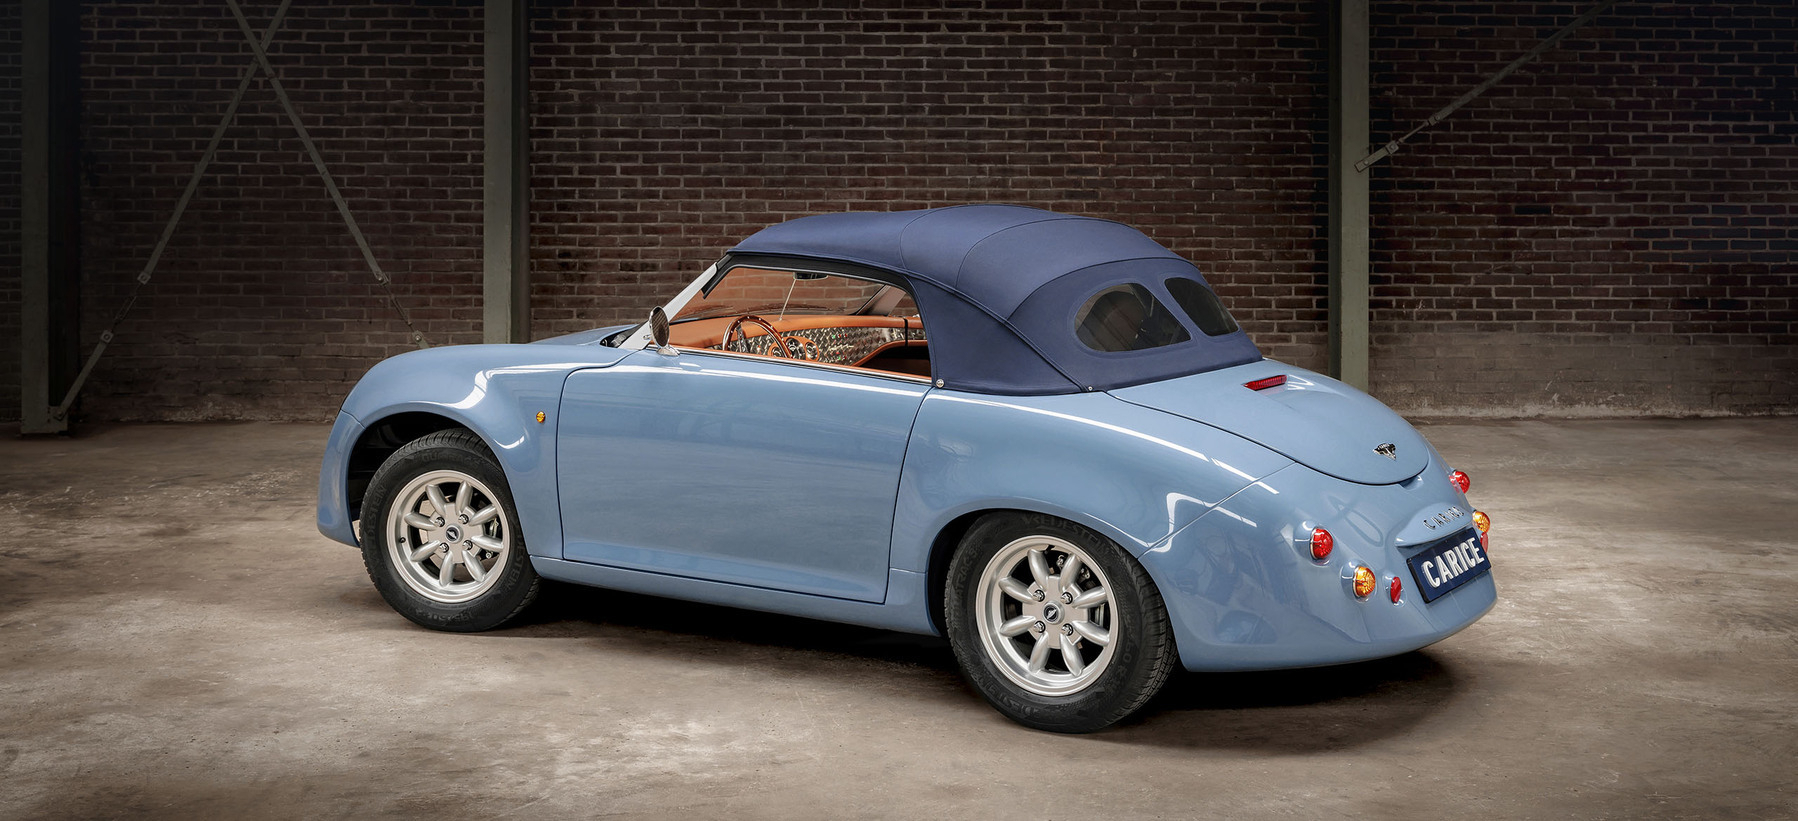 A blue convertible car with a navy soft top parked in a spacious industrial-style garage with a brick wall background